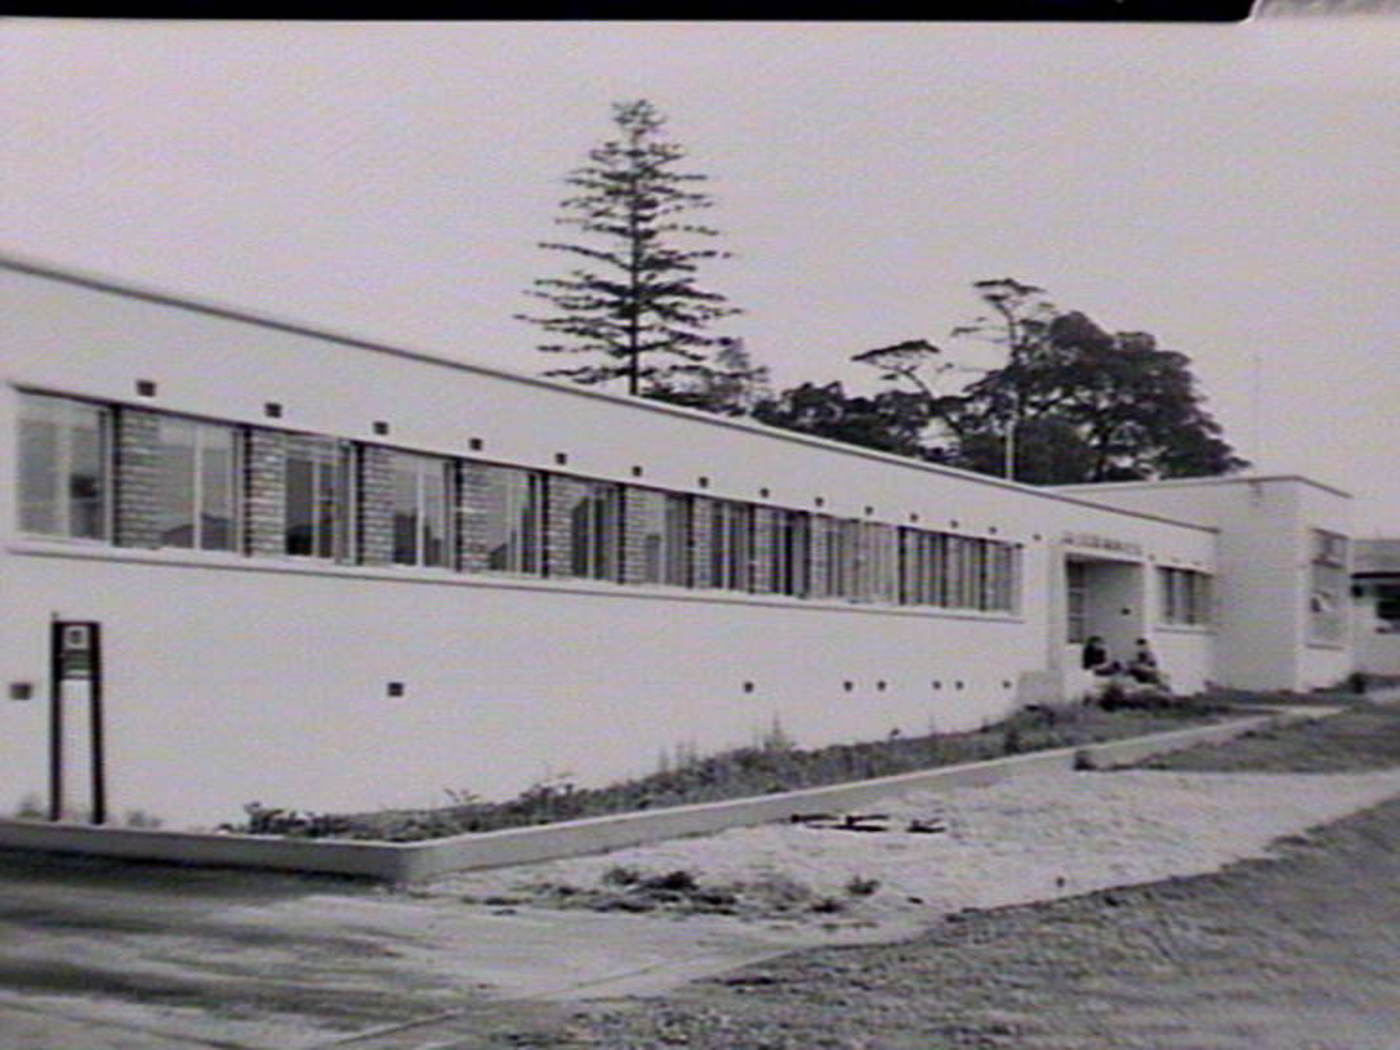 Here is a photo of the GMF Electric Motor Company factory in Arncliffe, NSW in September 1951. Found on the Trove website - copyright apparently expired in 2001.